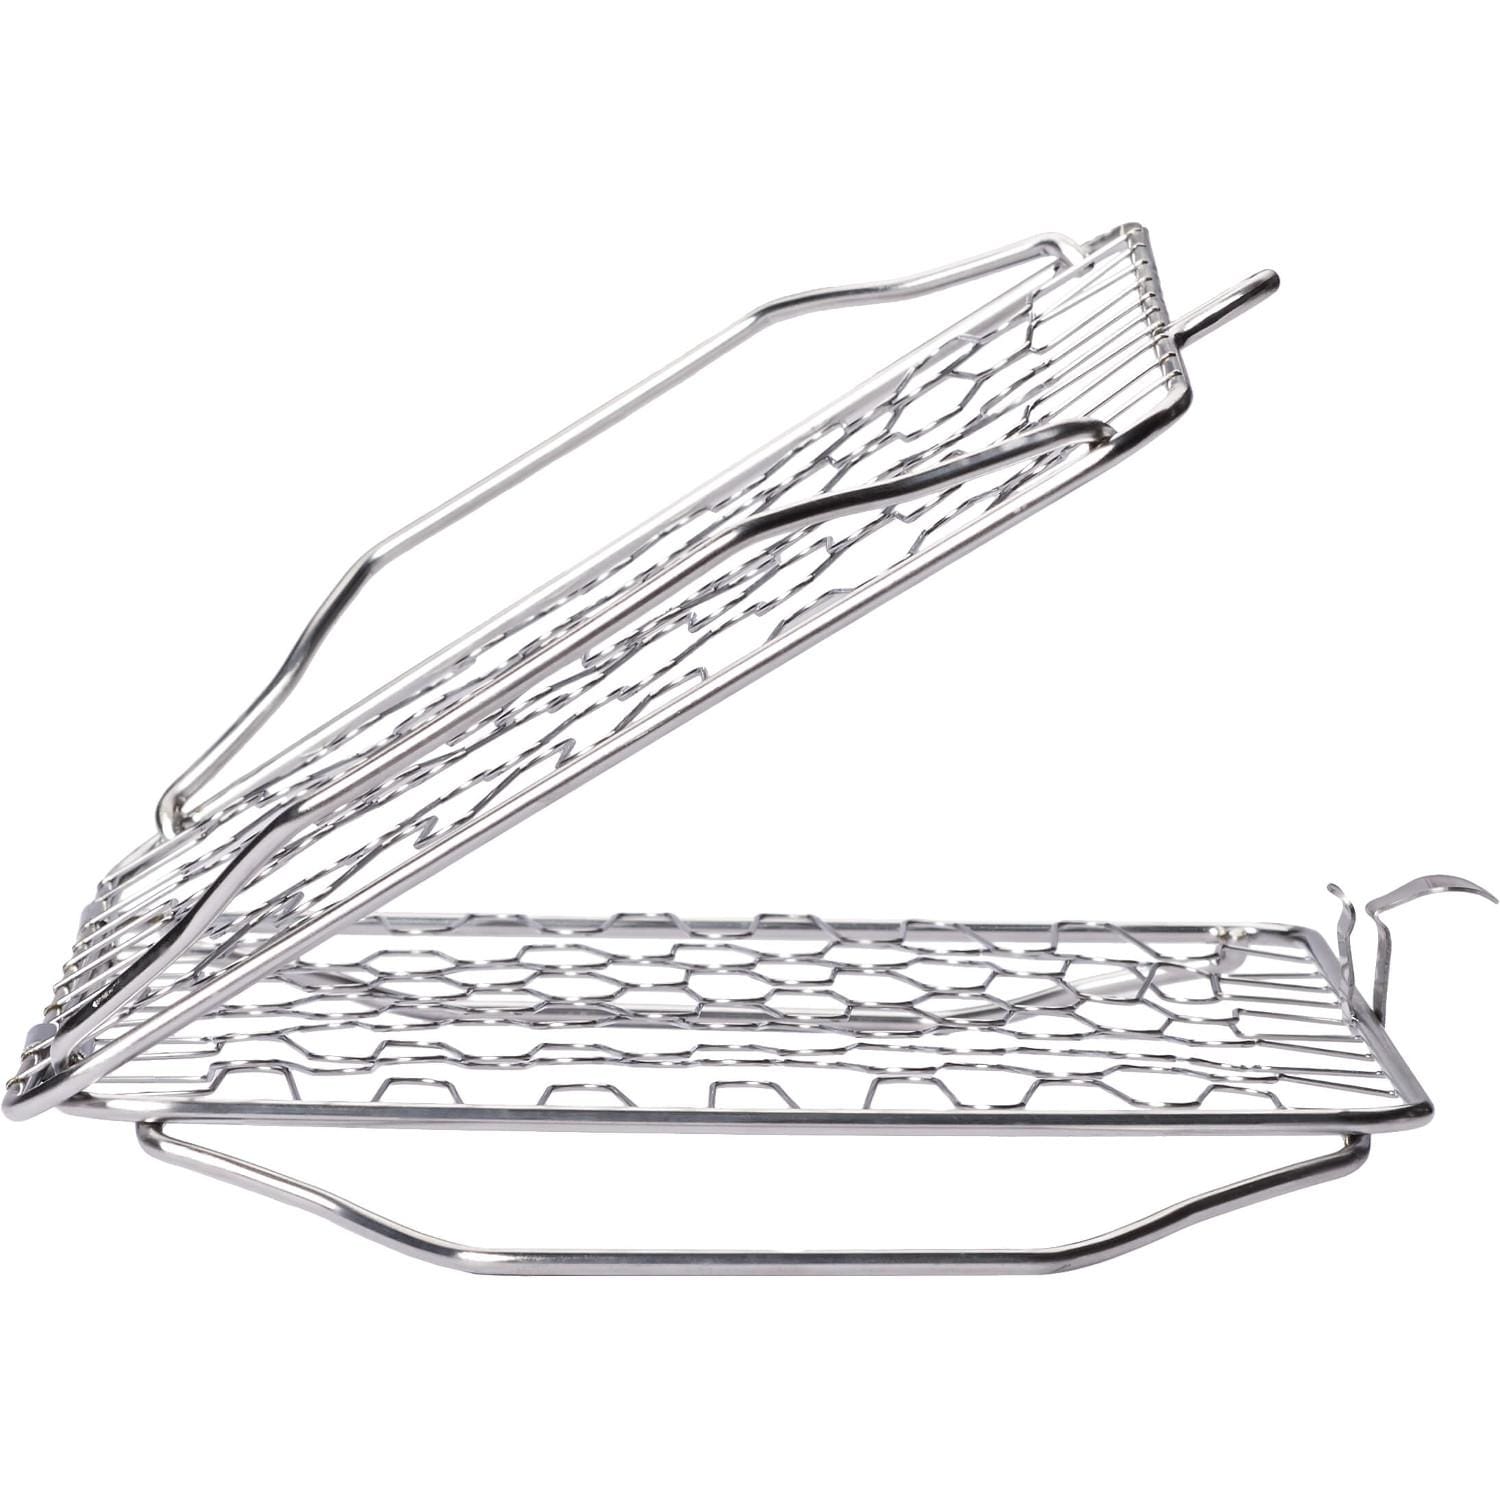 Flexible Grill Basket - image 3 of 3